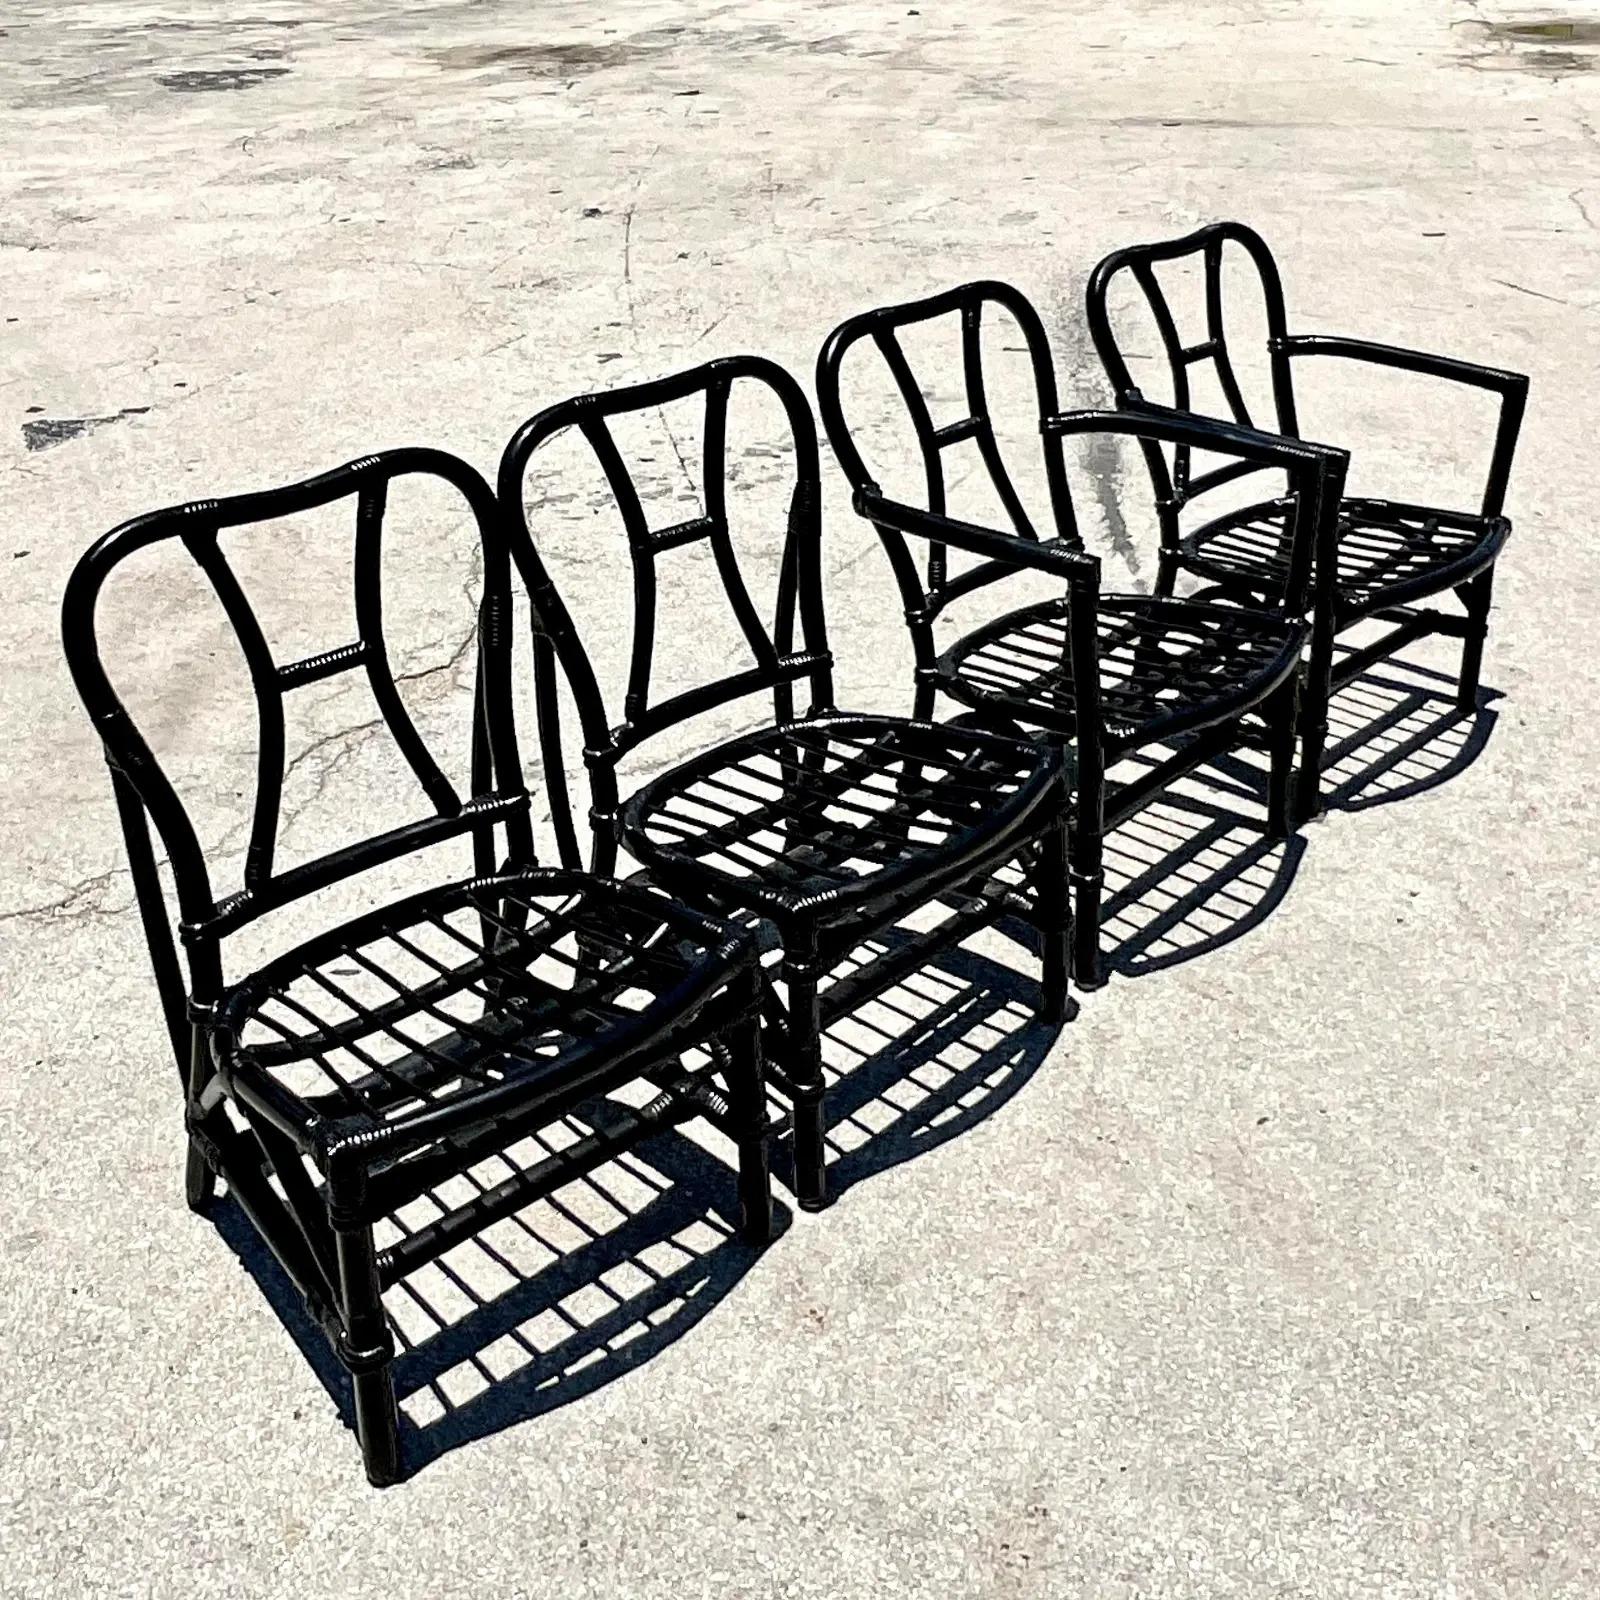 Philippine Vintage Coastal Painted Rattan Arm Chairs - A Pair For Sale